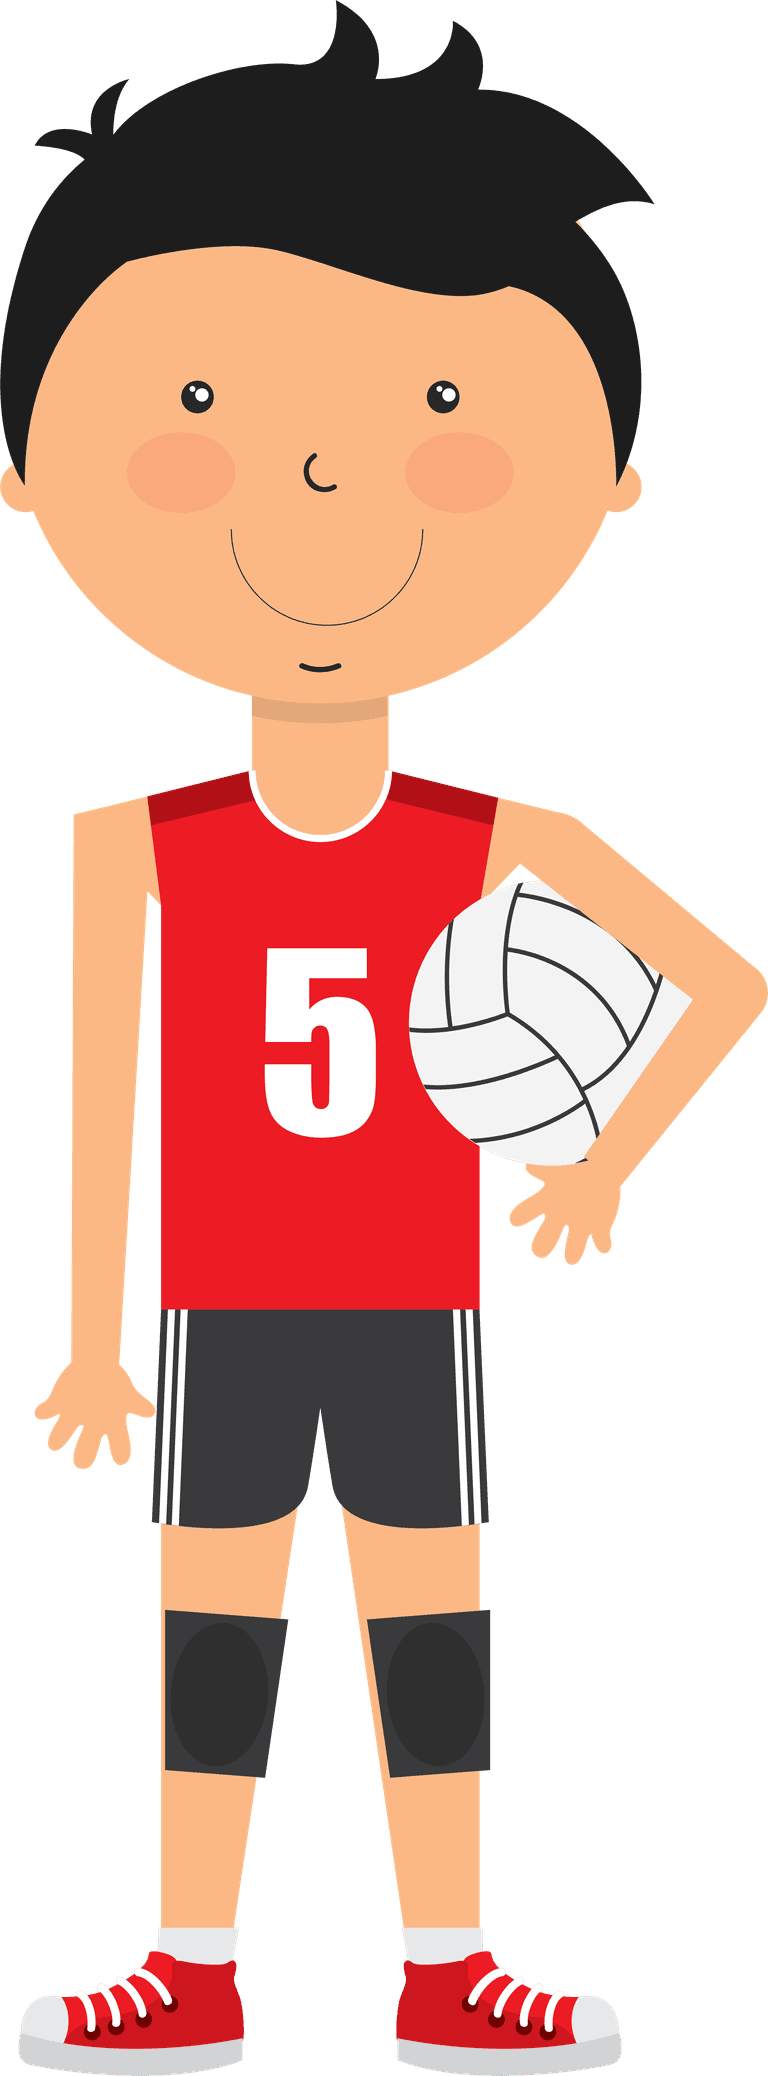 Flat icons of kids doing different types of sports